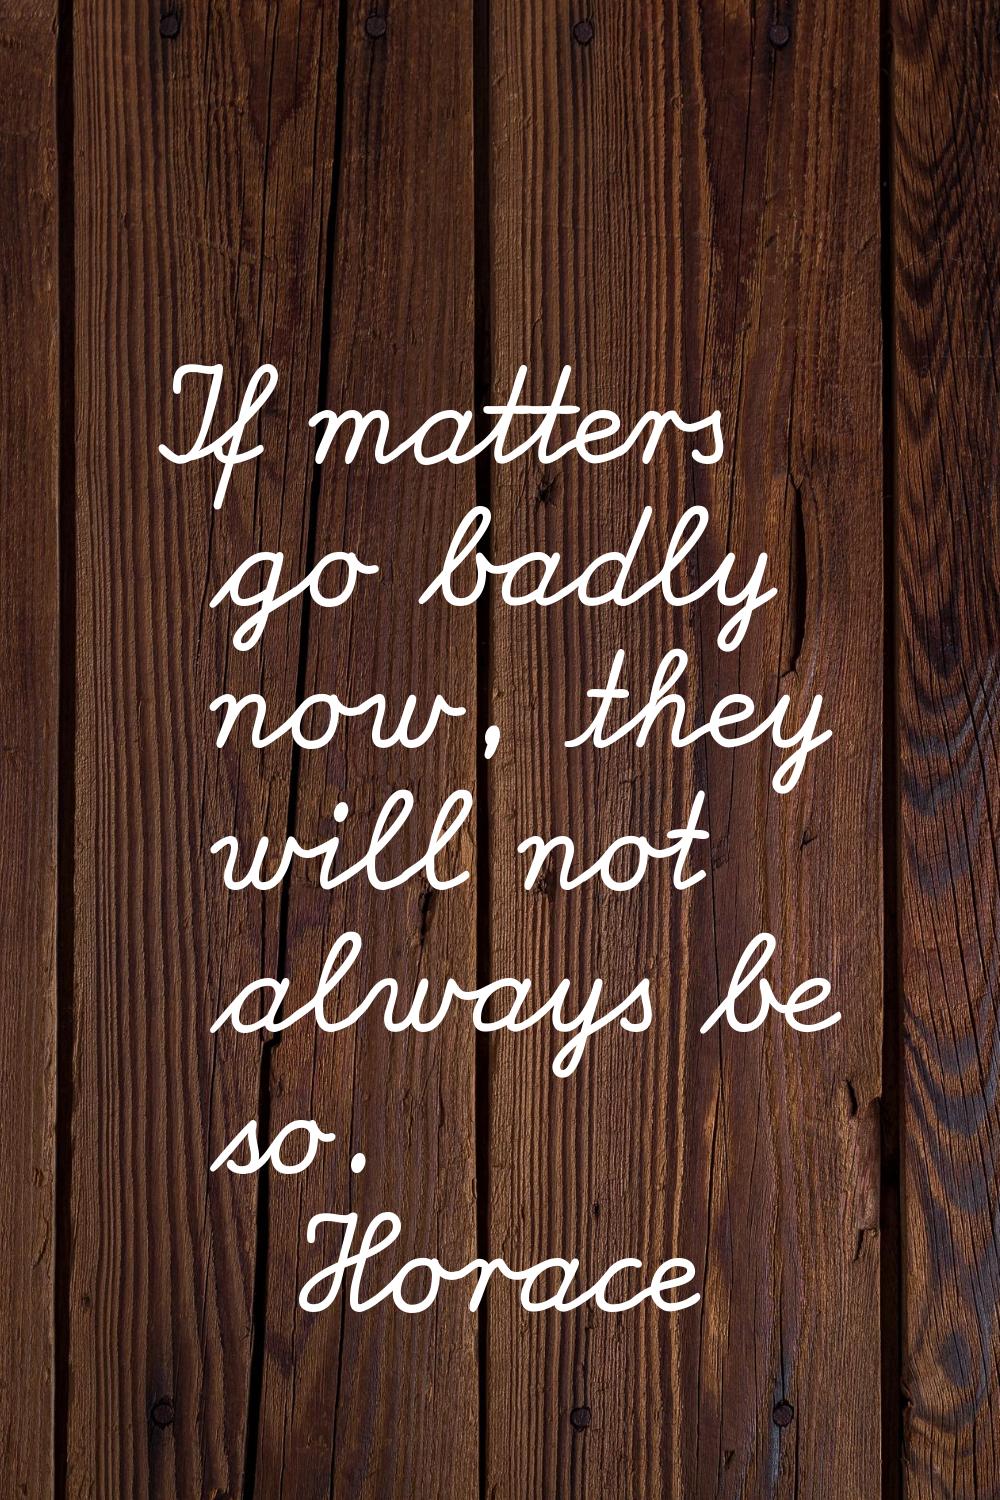 If matters go badly now, they will not always be so.